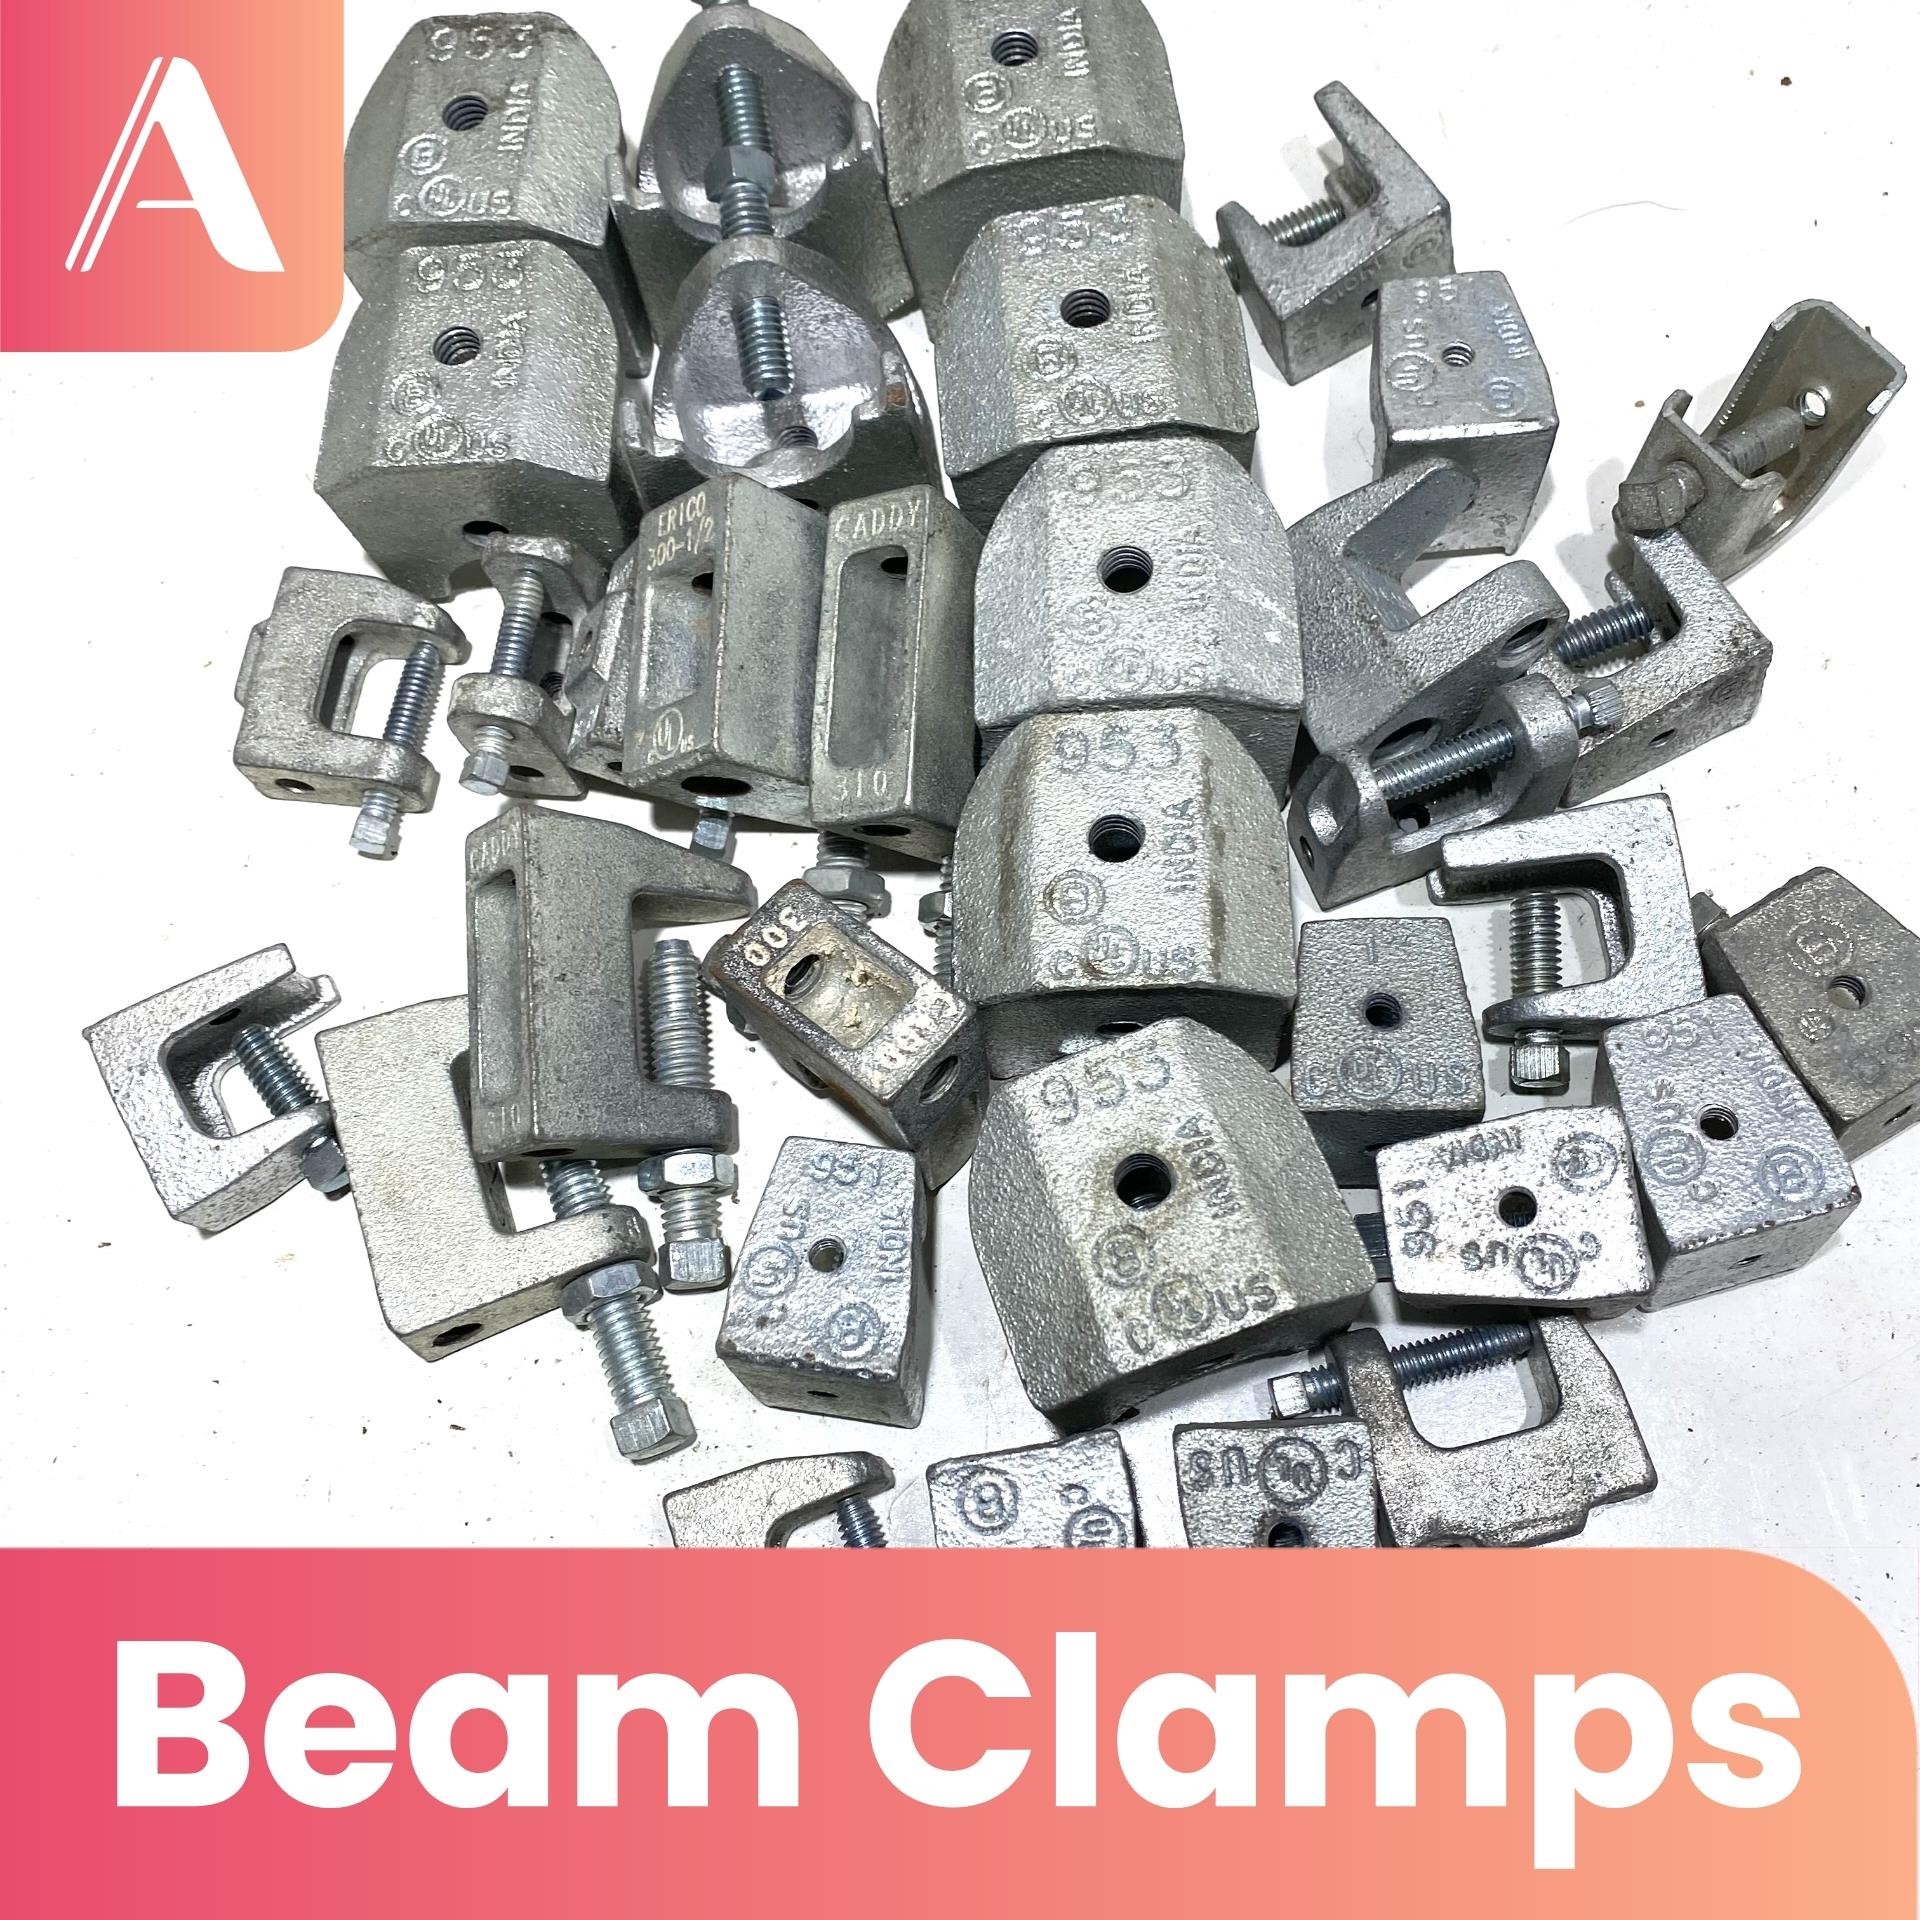 Lot of Beam Clamps